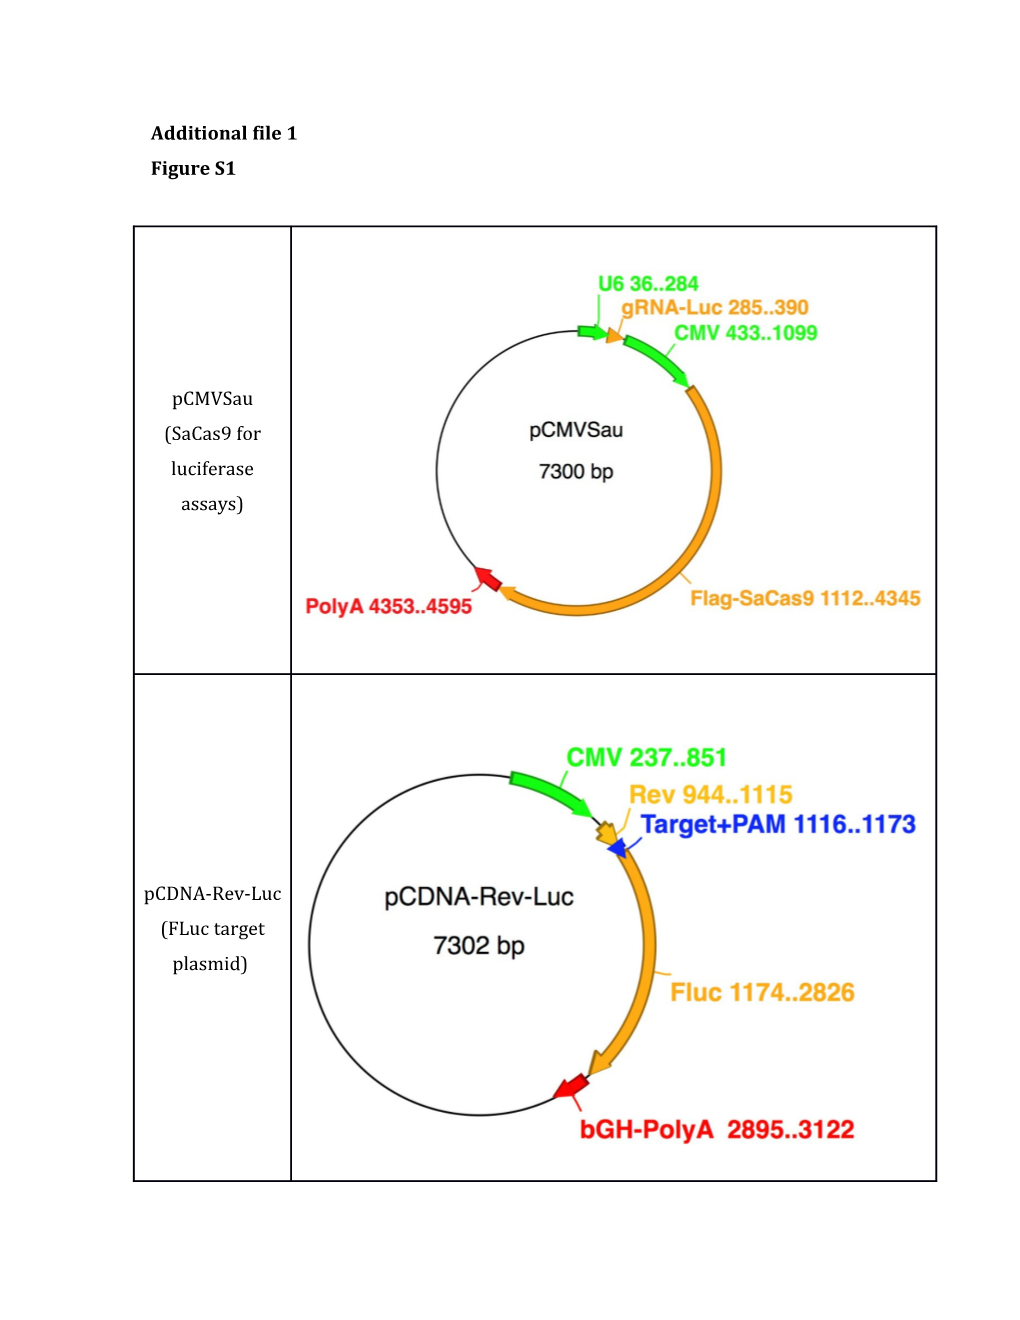 Figure S1: Maps of Some of the Cas9 and AAV Plasmids Used to Generate Data Shown